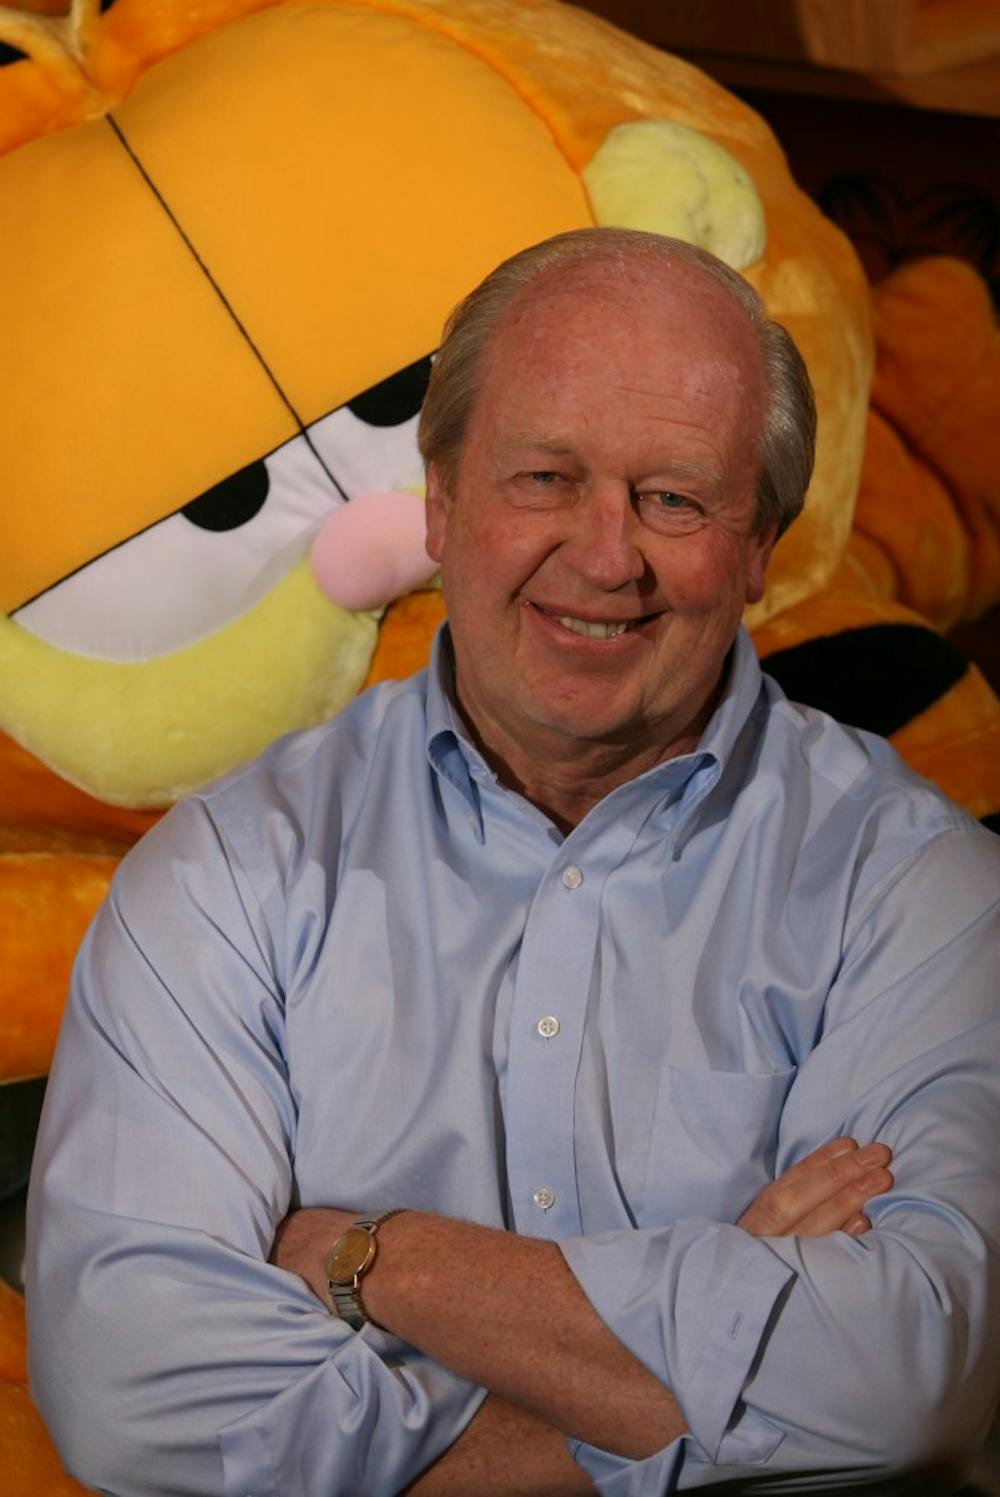 <p><strong>&nbsp;</strong>Jim Davis' Garfield the cat has been recognized by different comic strips and television screens since 1978. In 1981, Davis established Paws Inc. to keep his licensing for the famous cat. <strong>Photo Courtesy M Magazine, The Star Press.</strong></p>